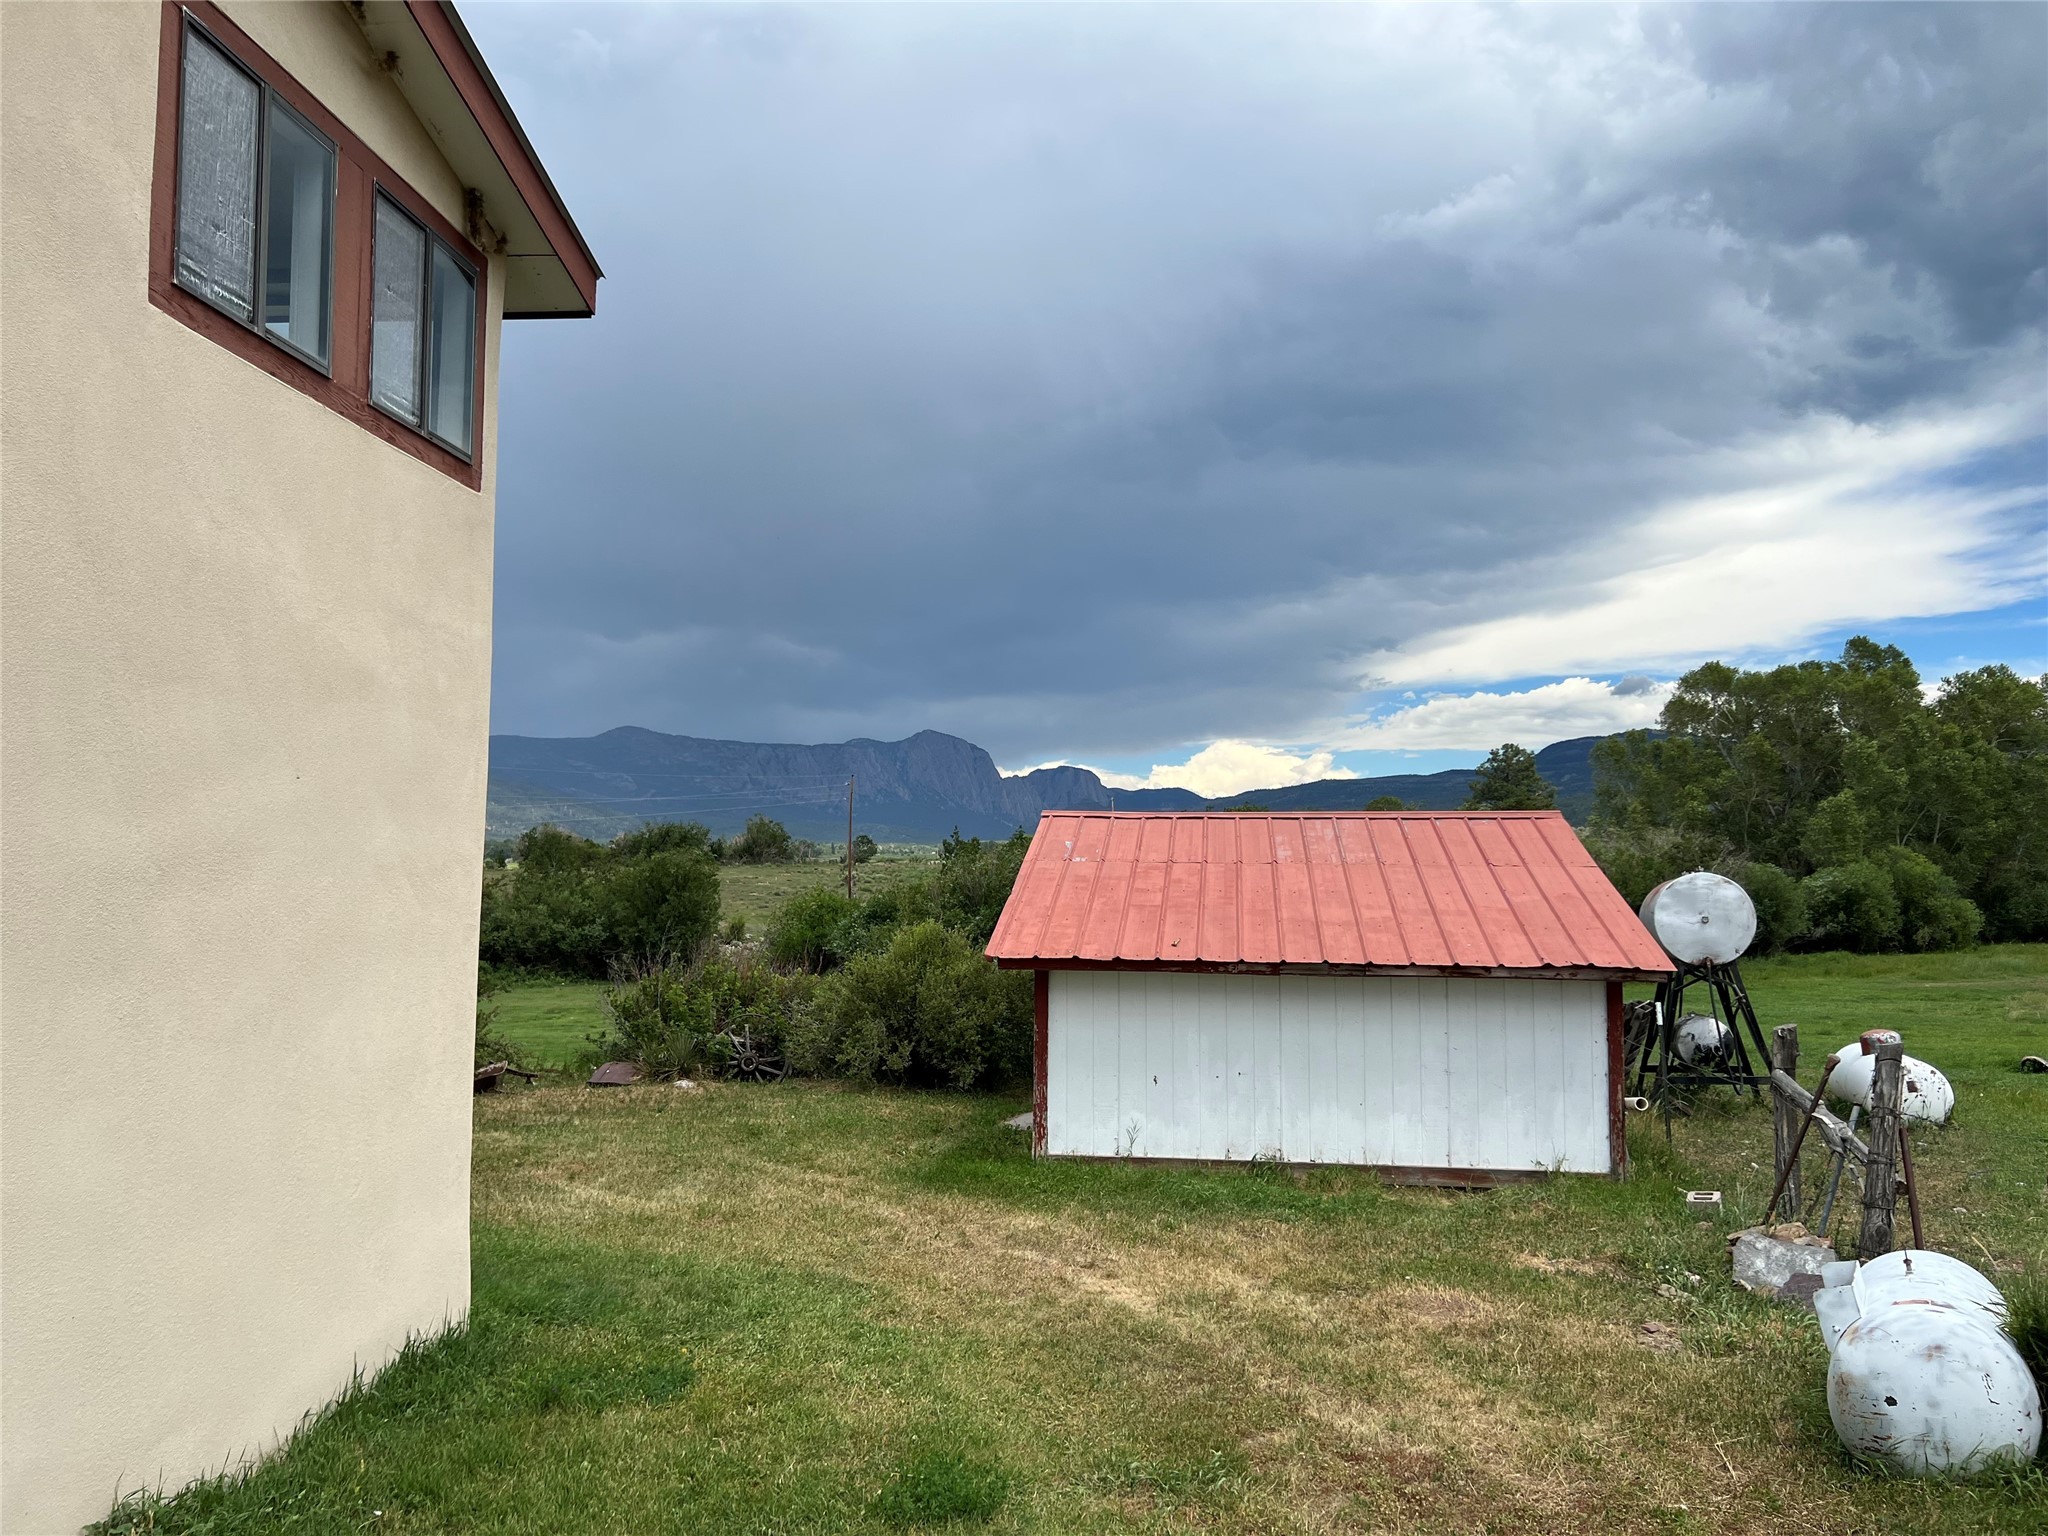 446 State Road 573, Ensenada, New Mexico 87551, 3 Bedrooms Bedrooms, ,3 BathroomsBathrooms,Residential,For Sale,446 State Road 573,202232251